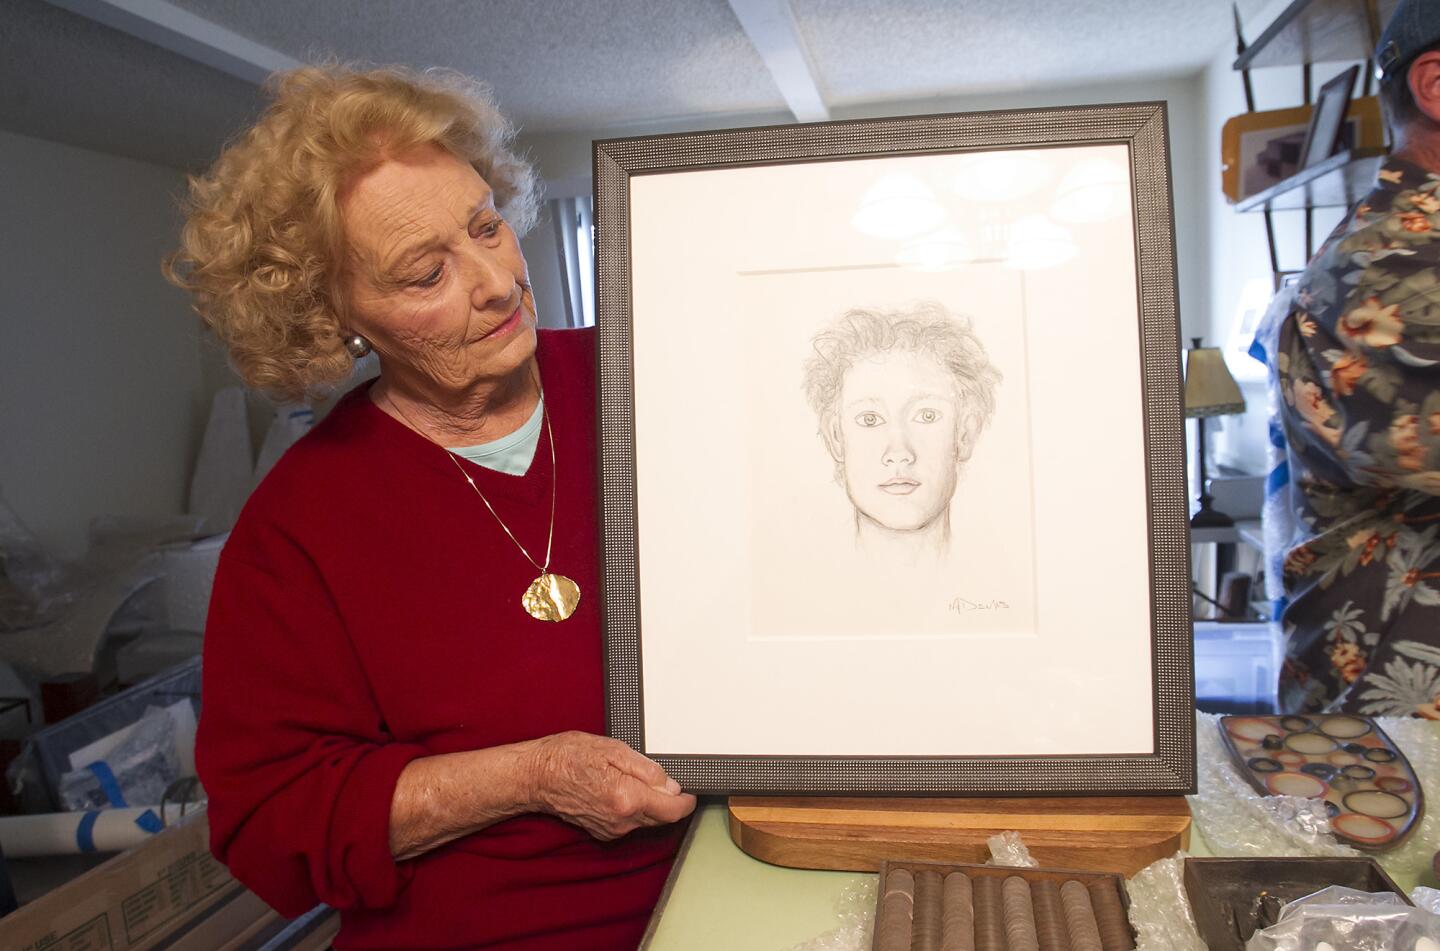 Carolyn McDemas holds a self-portrait of her late son James, who was a contemporary artist, designer, and sculptor who from Newport Beach. Her son had one of his sculptures installed at the Costa Mesa City Hall and will have it officially dedicated in ceremony in December.